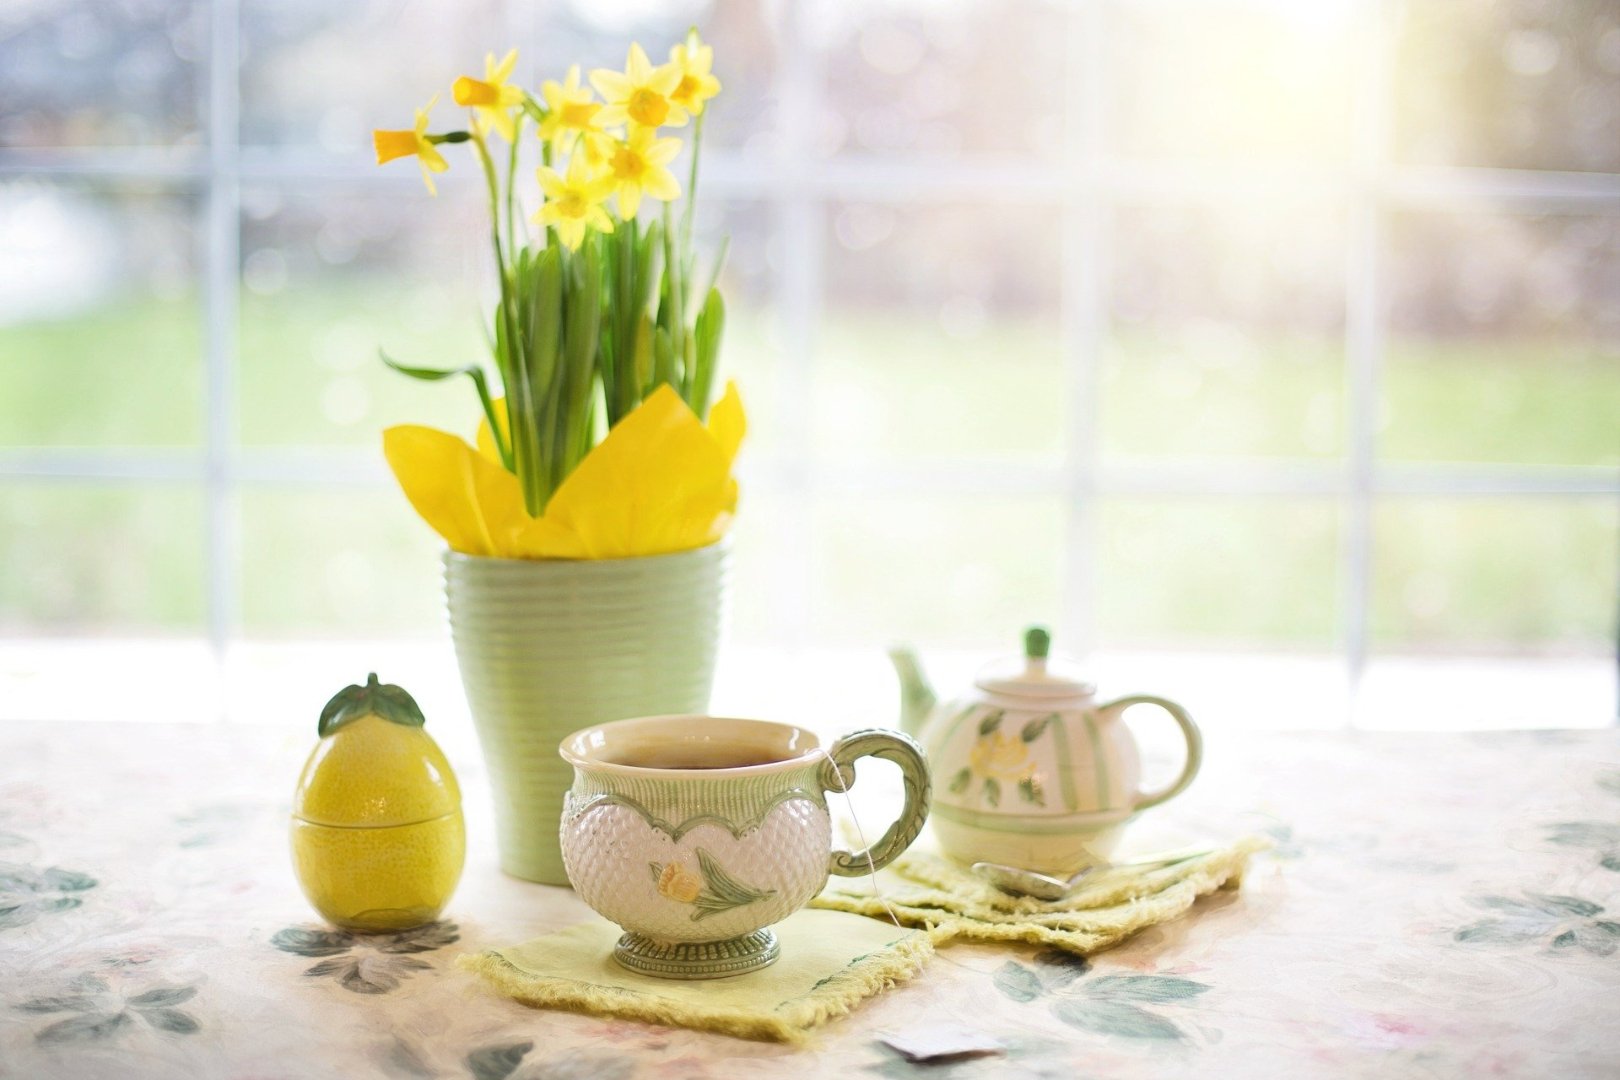 bouquet of daffodils with green and yellow tea service